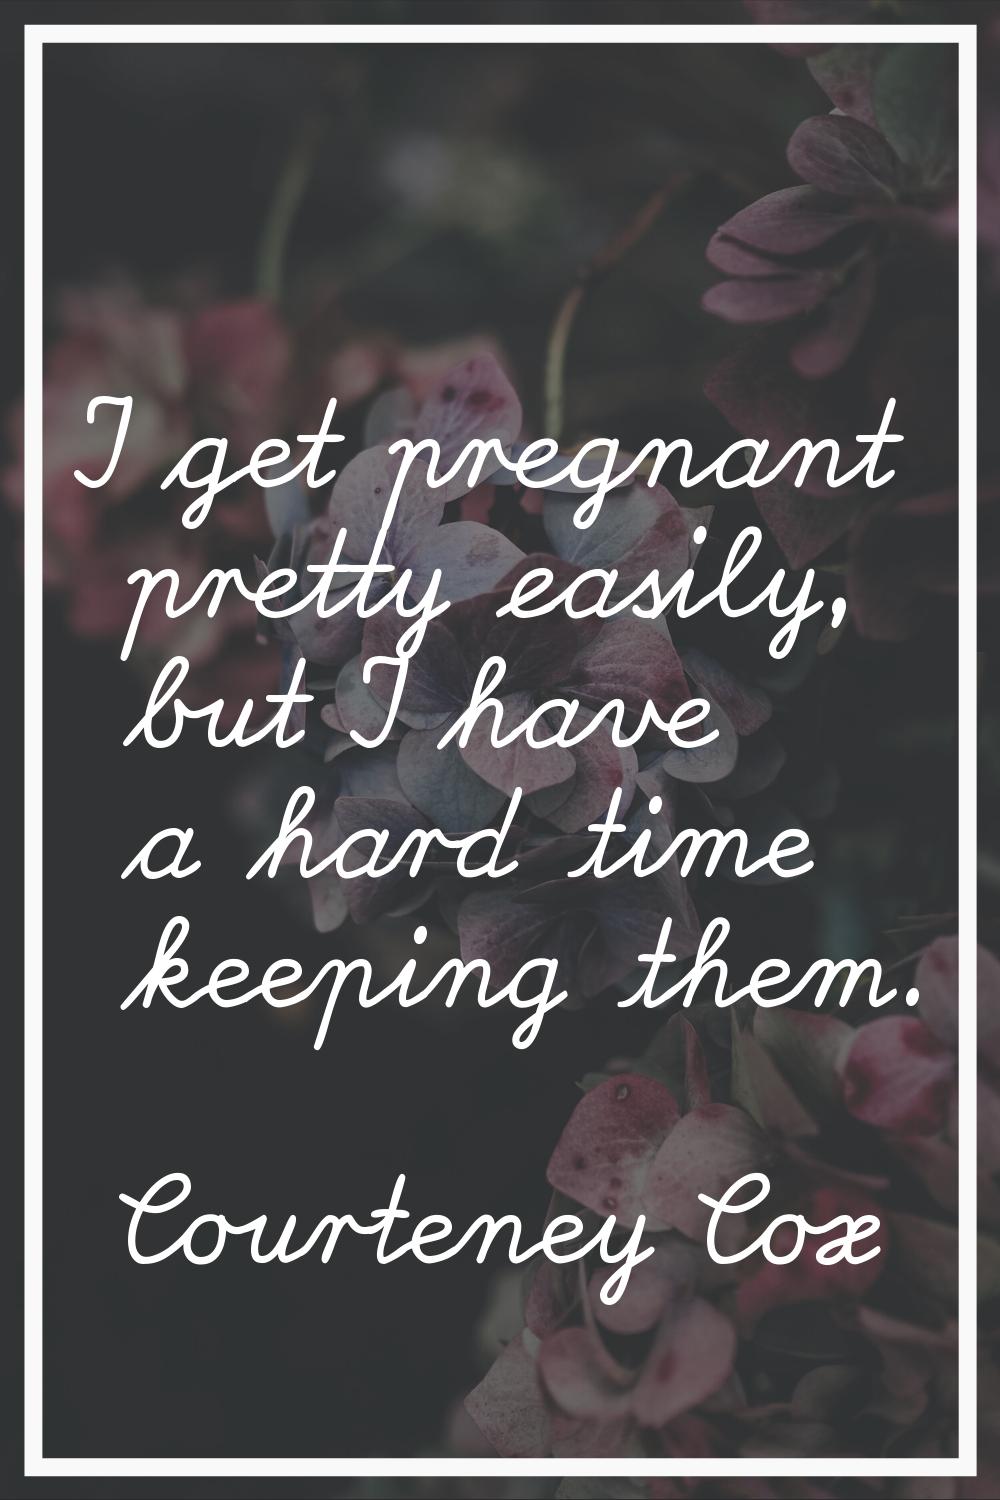 I get pregnant pretty easily, but I have a hard time keeping them.